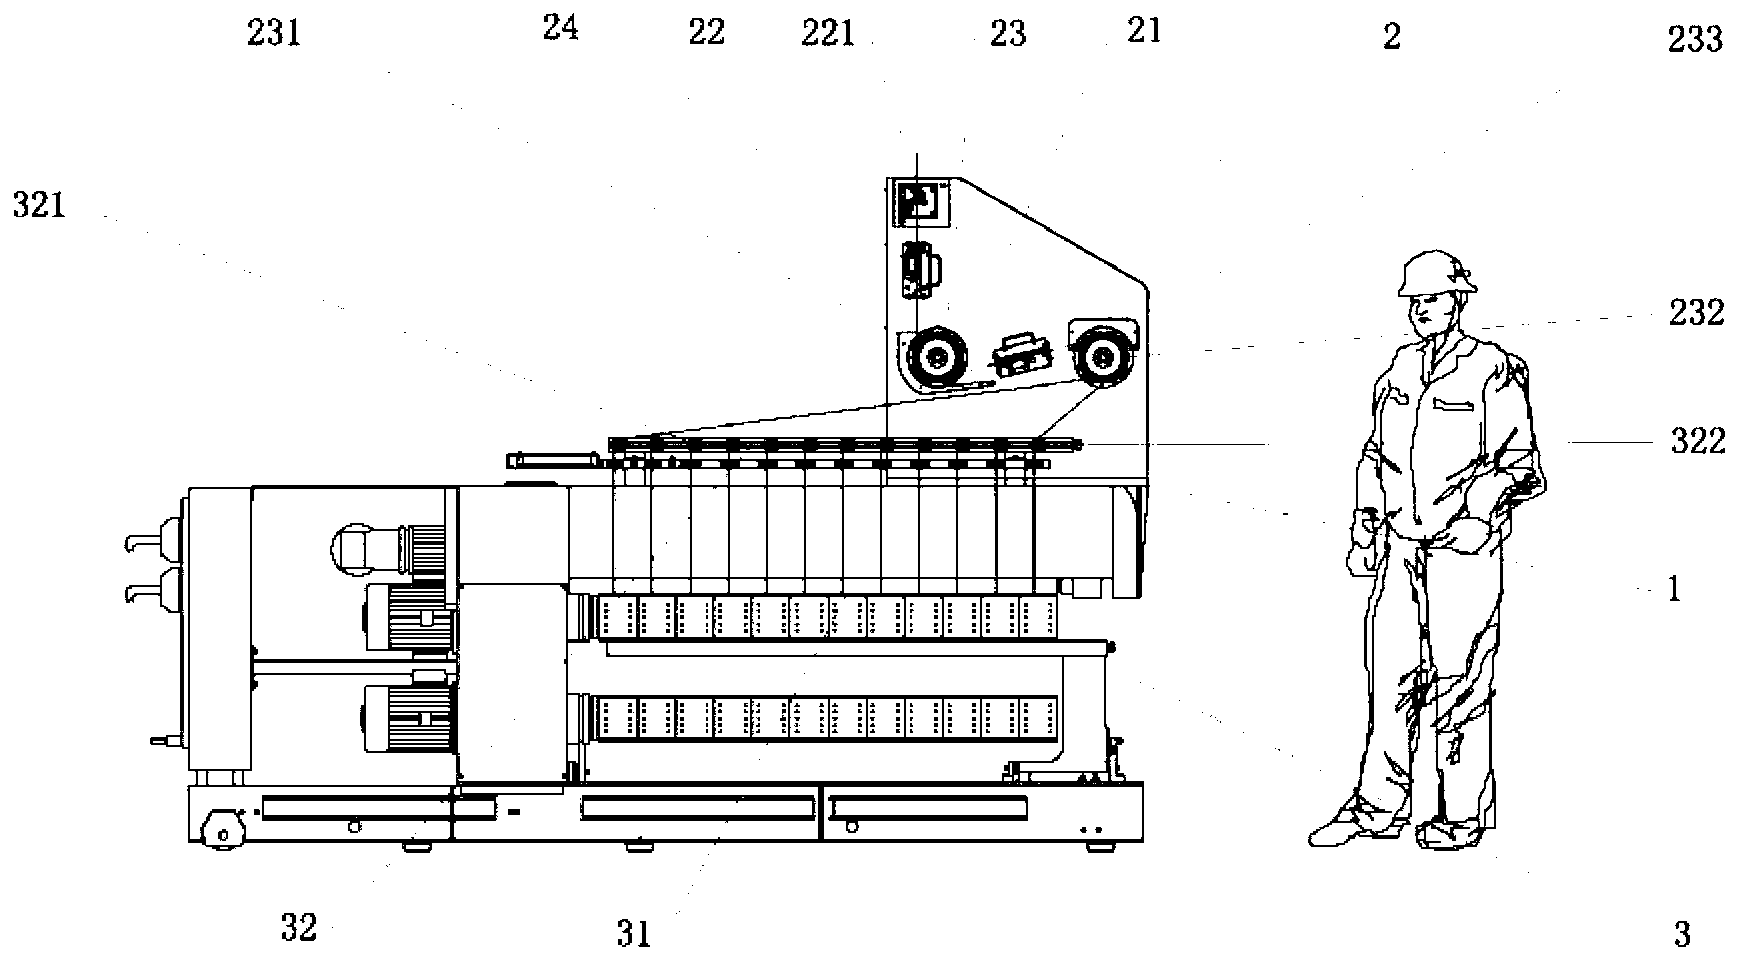 Filament drawing and winding device